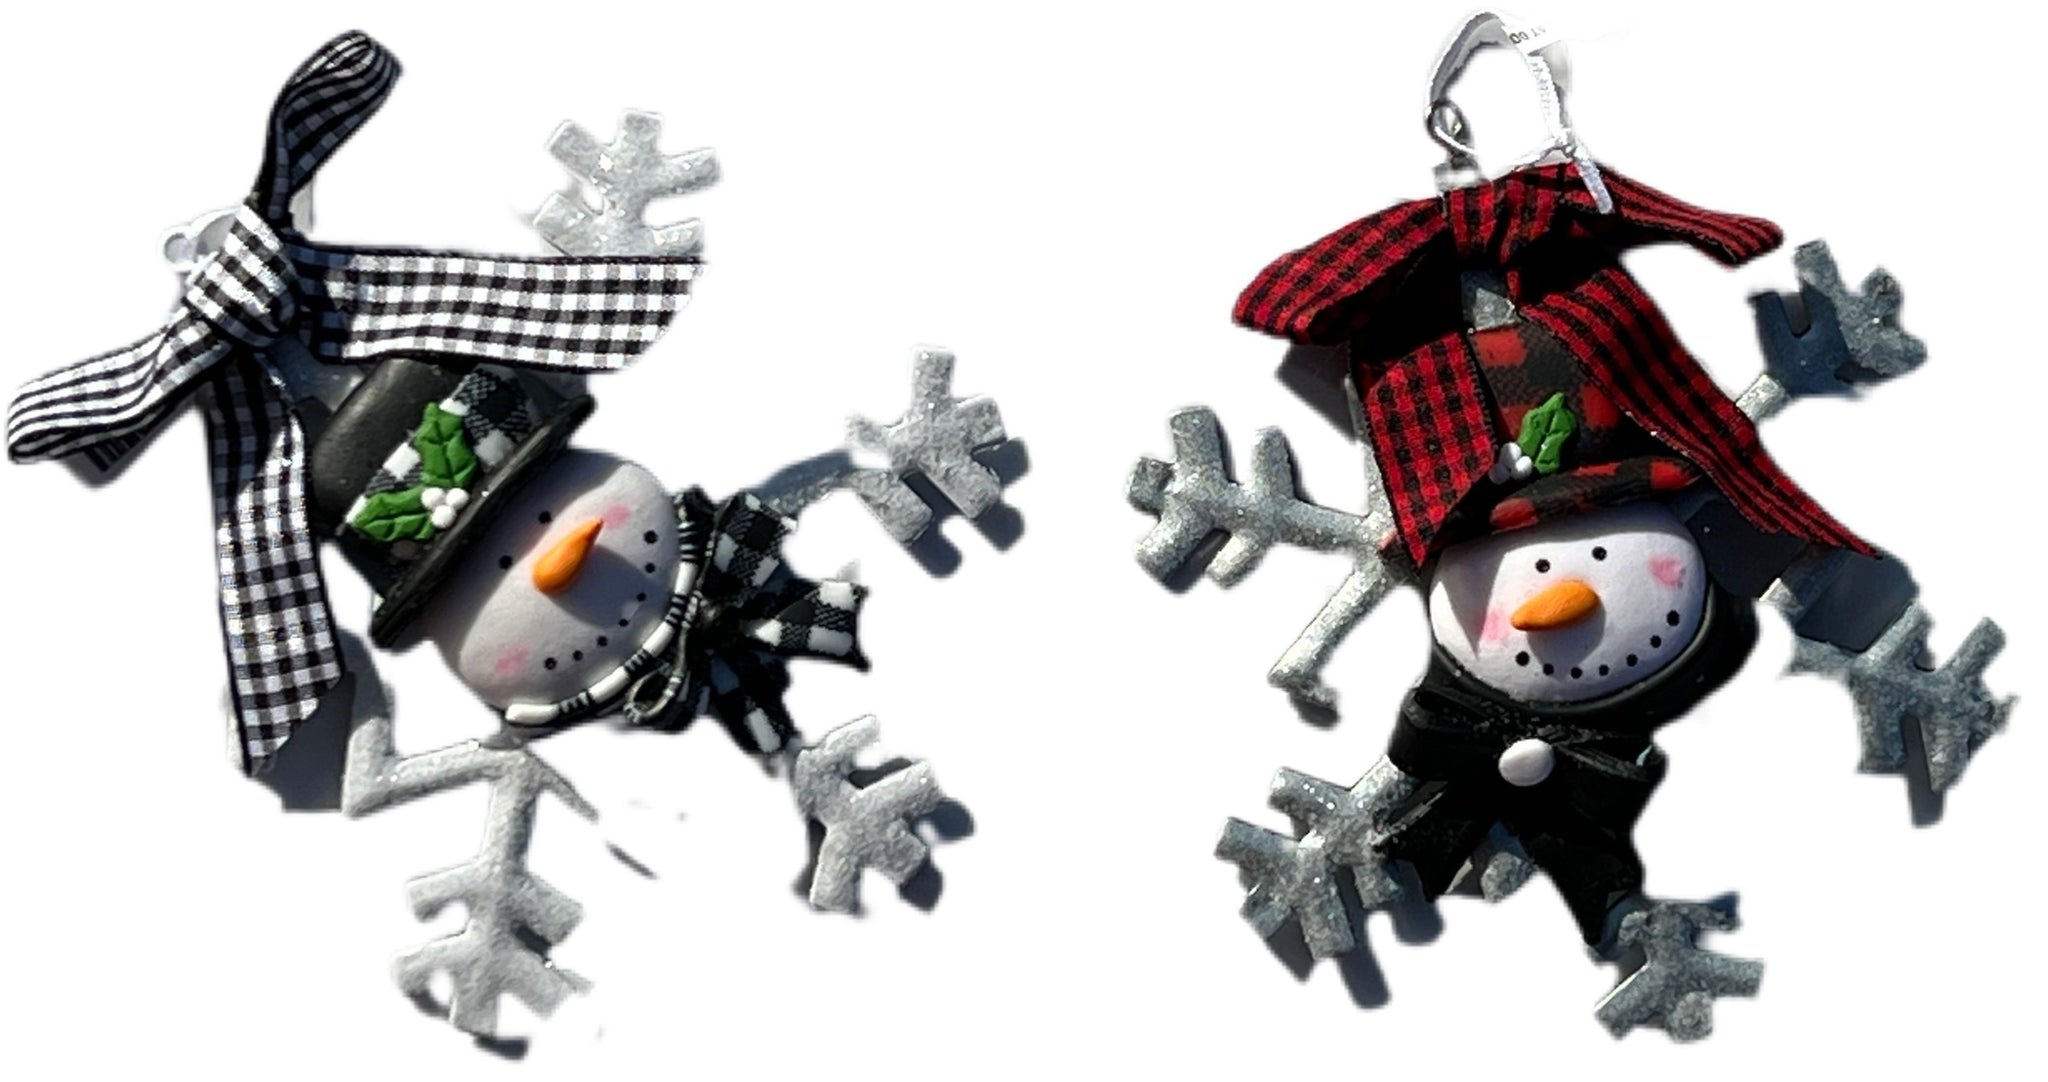 Assorted Snowman Ornament, INDIVIDUALLY SOLD